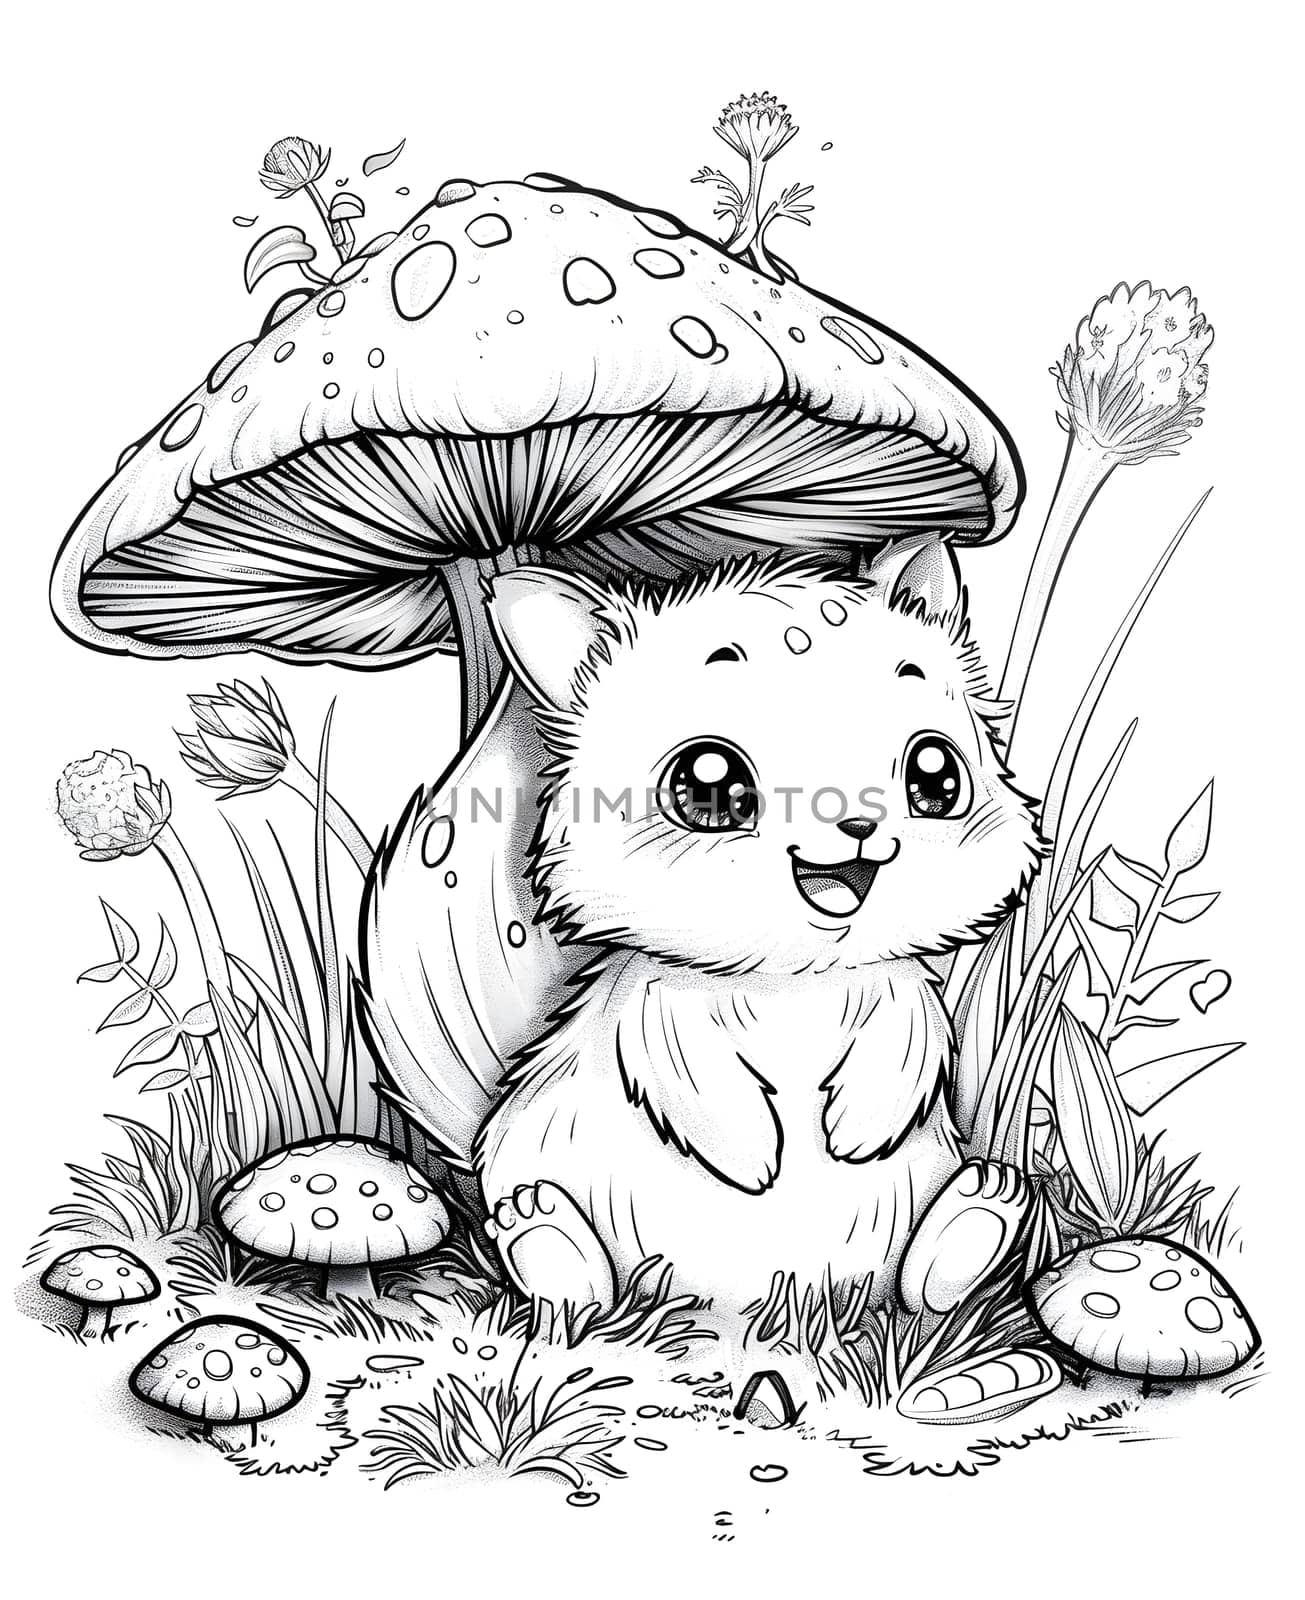 A Vertebrate organism portrayed in a black and white Cartoon drawing, sitting under a mushroom. The Art piece features detailed Botany elements with a whimsical Gesture